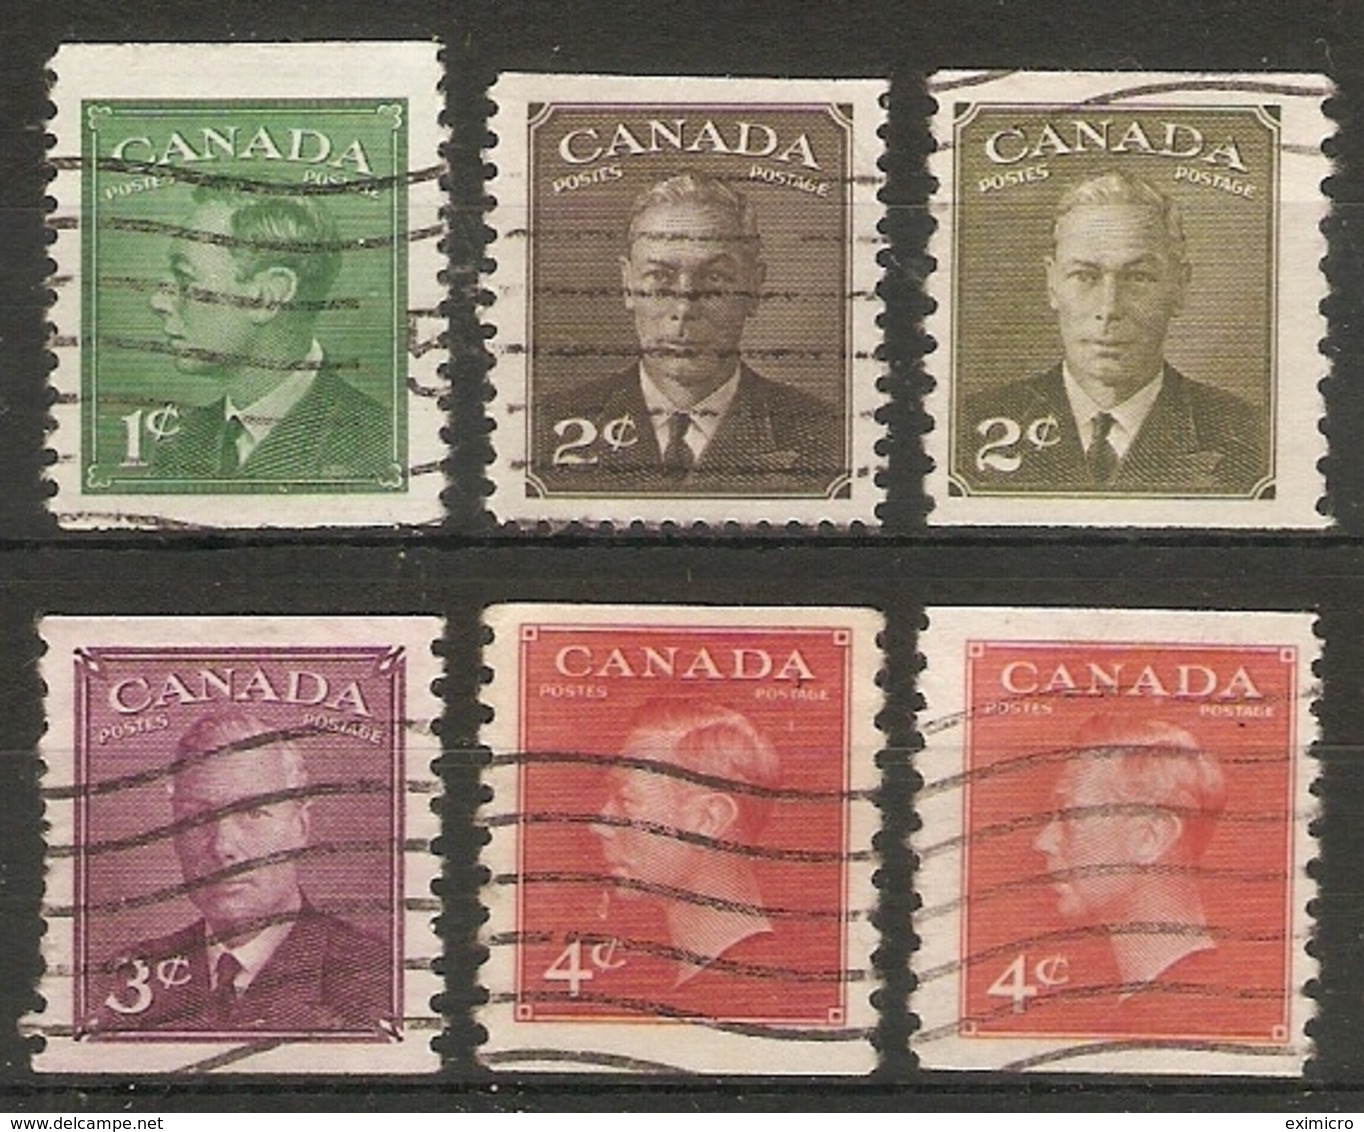 CANADA 1950 - 1951 SET OF 6 COIL STAMPS SG 419/422a IMPERF X PERF 9½ FINE USED Cat £30 - Gebruikt